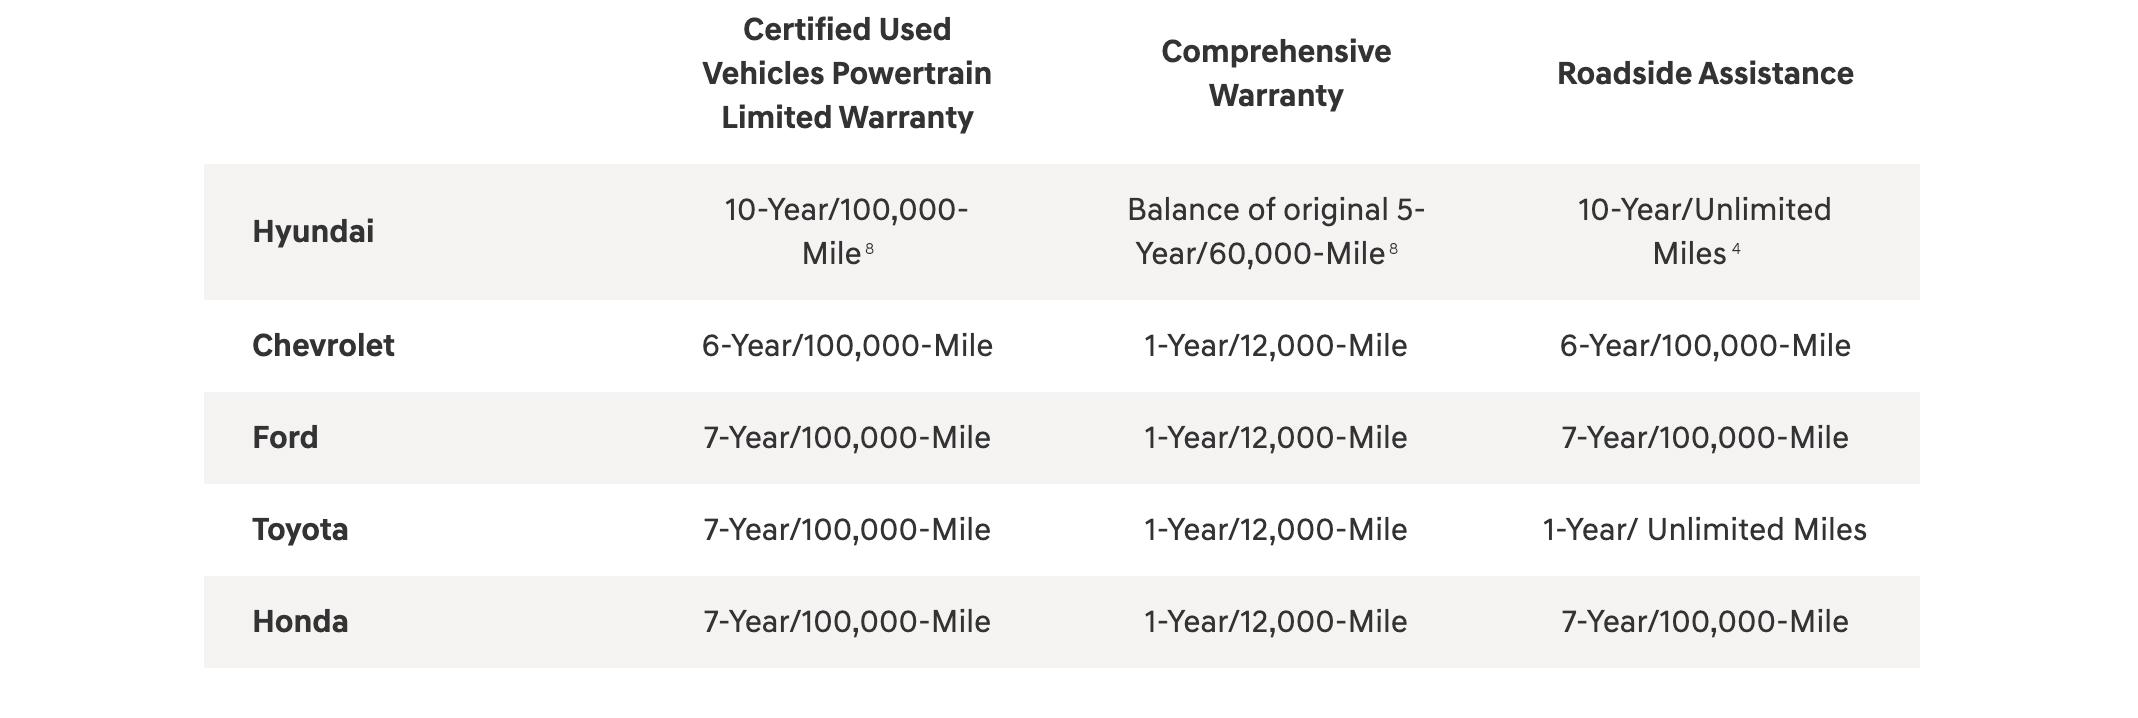 Compare certified used vehicle